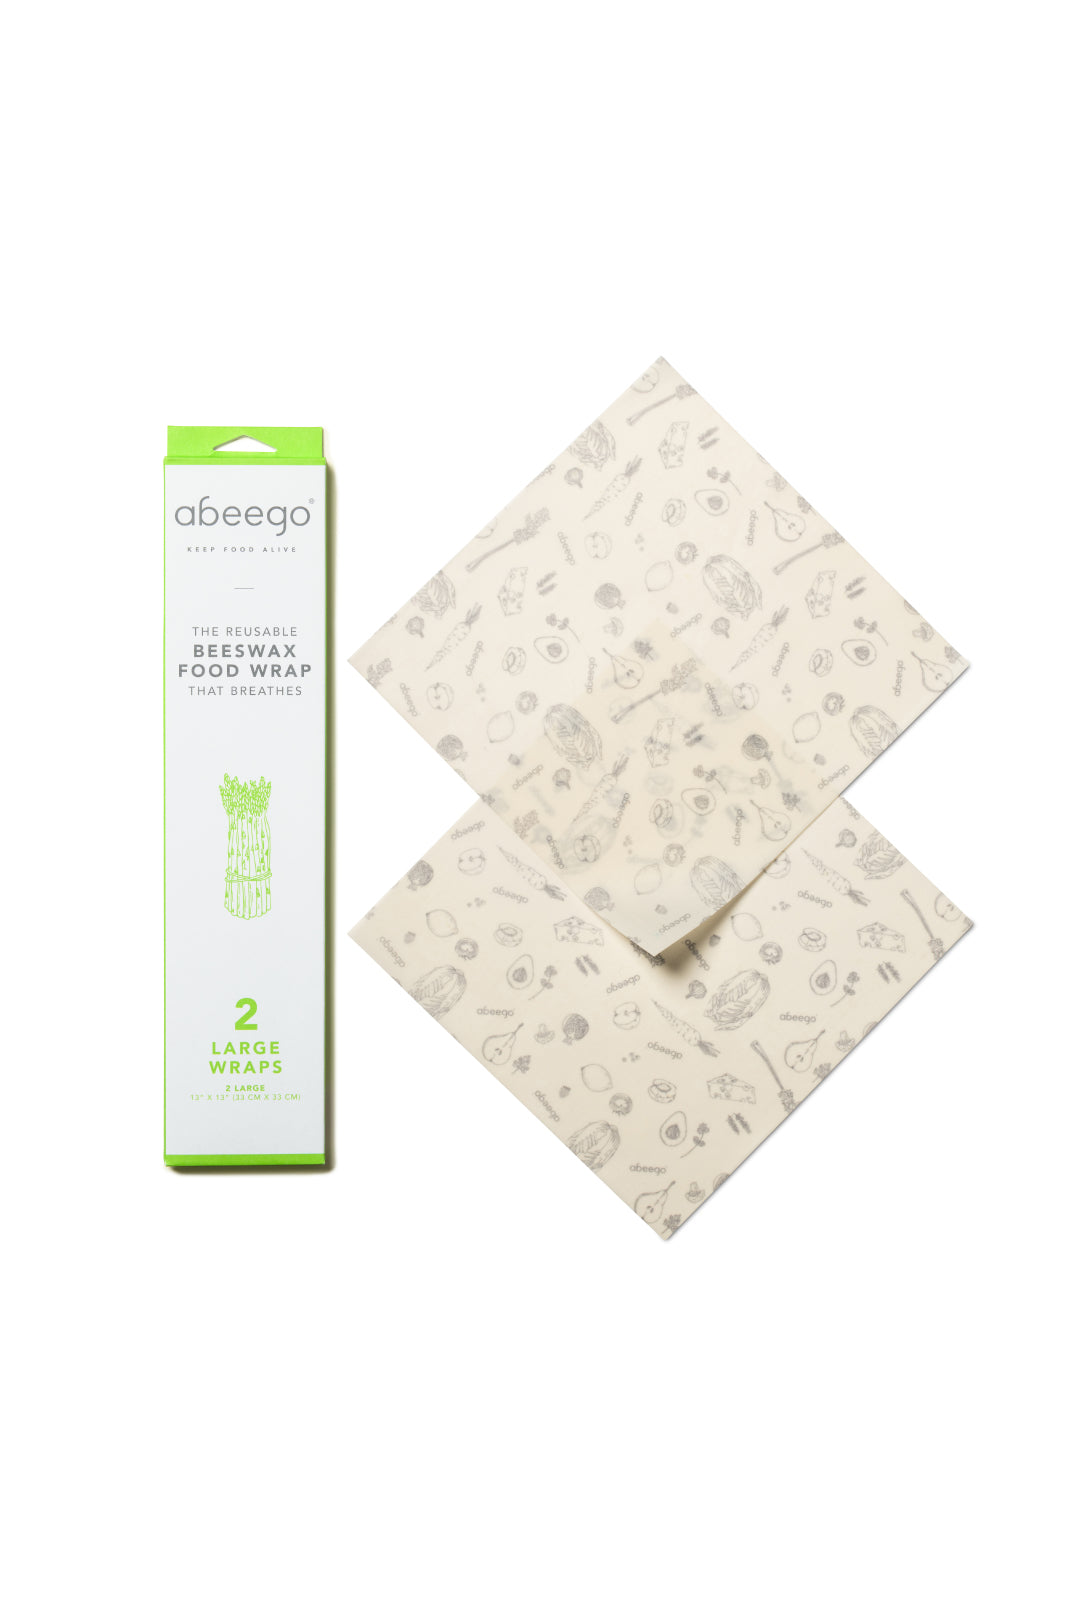 Abeego Beeswax Food Wrap - 2 Large